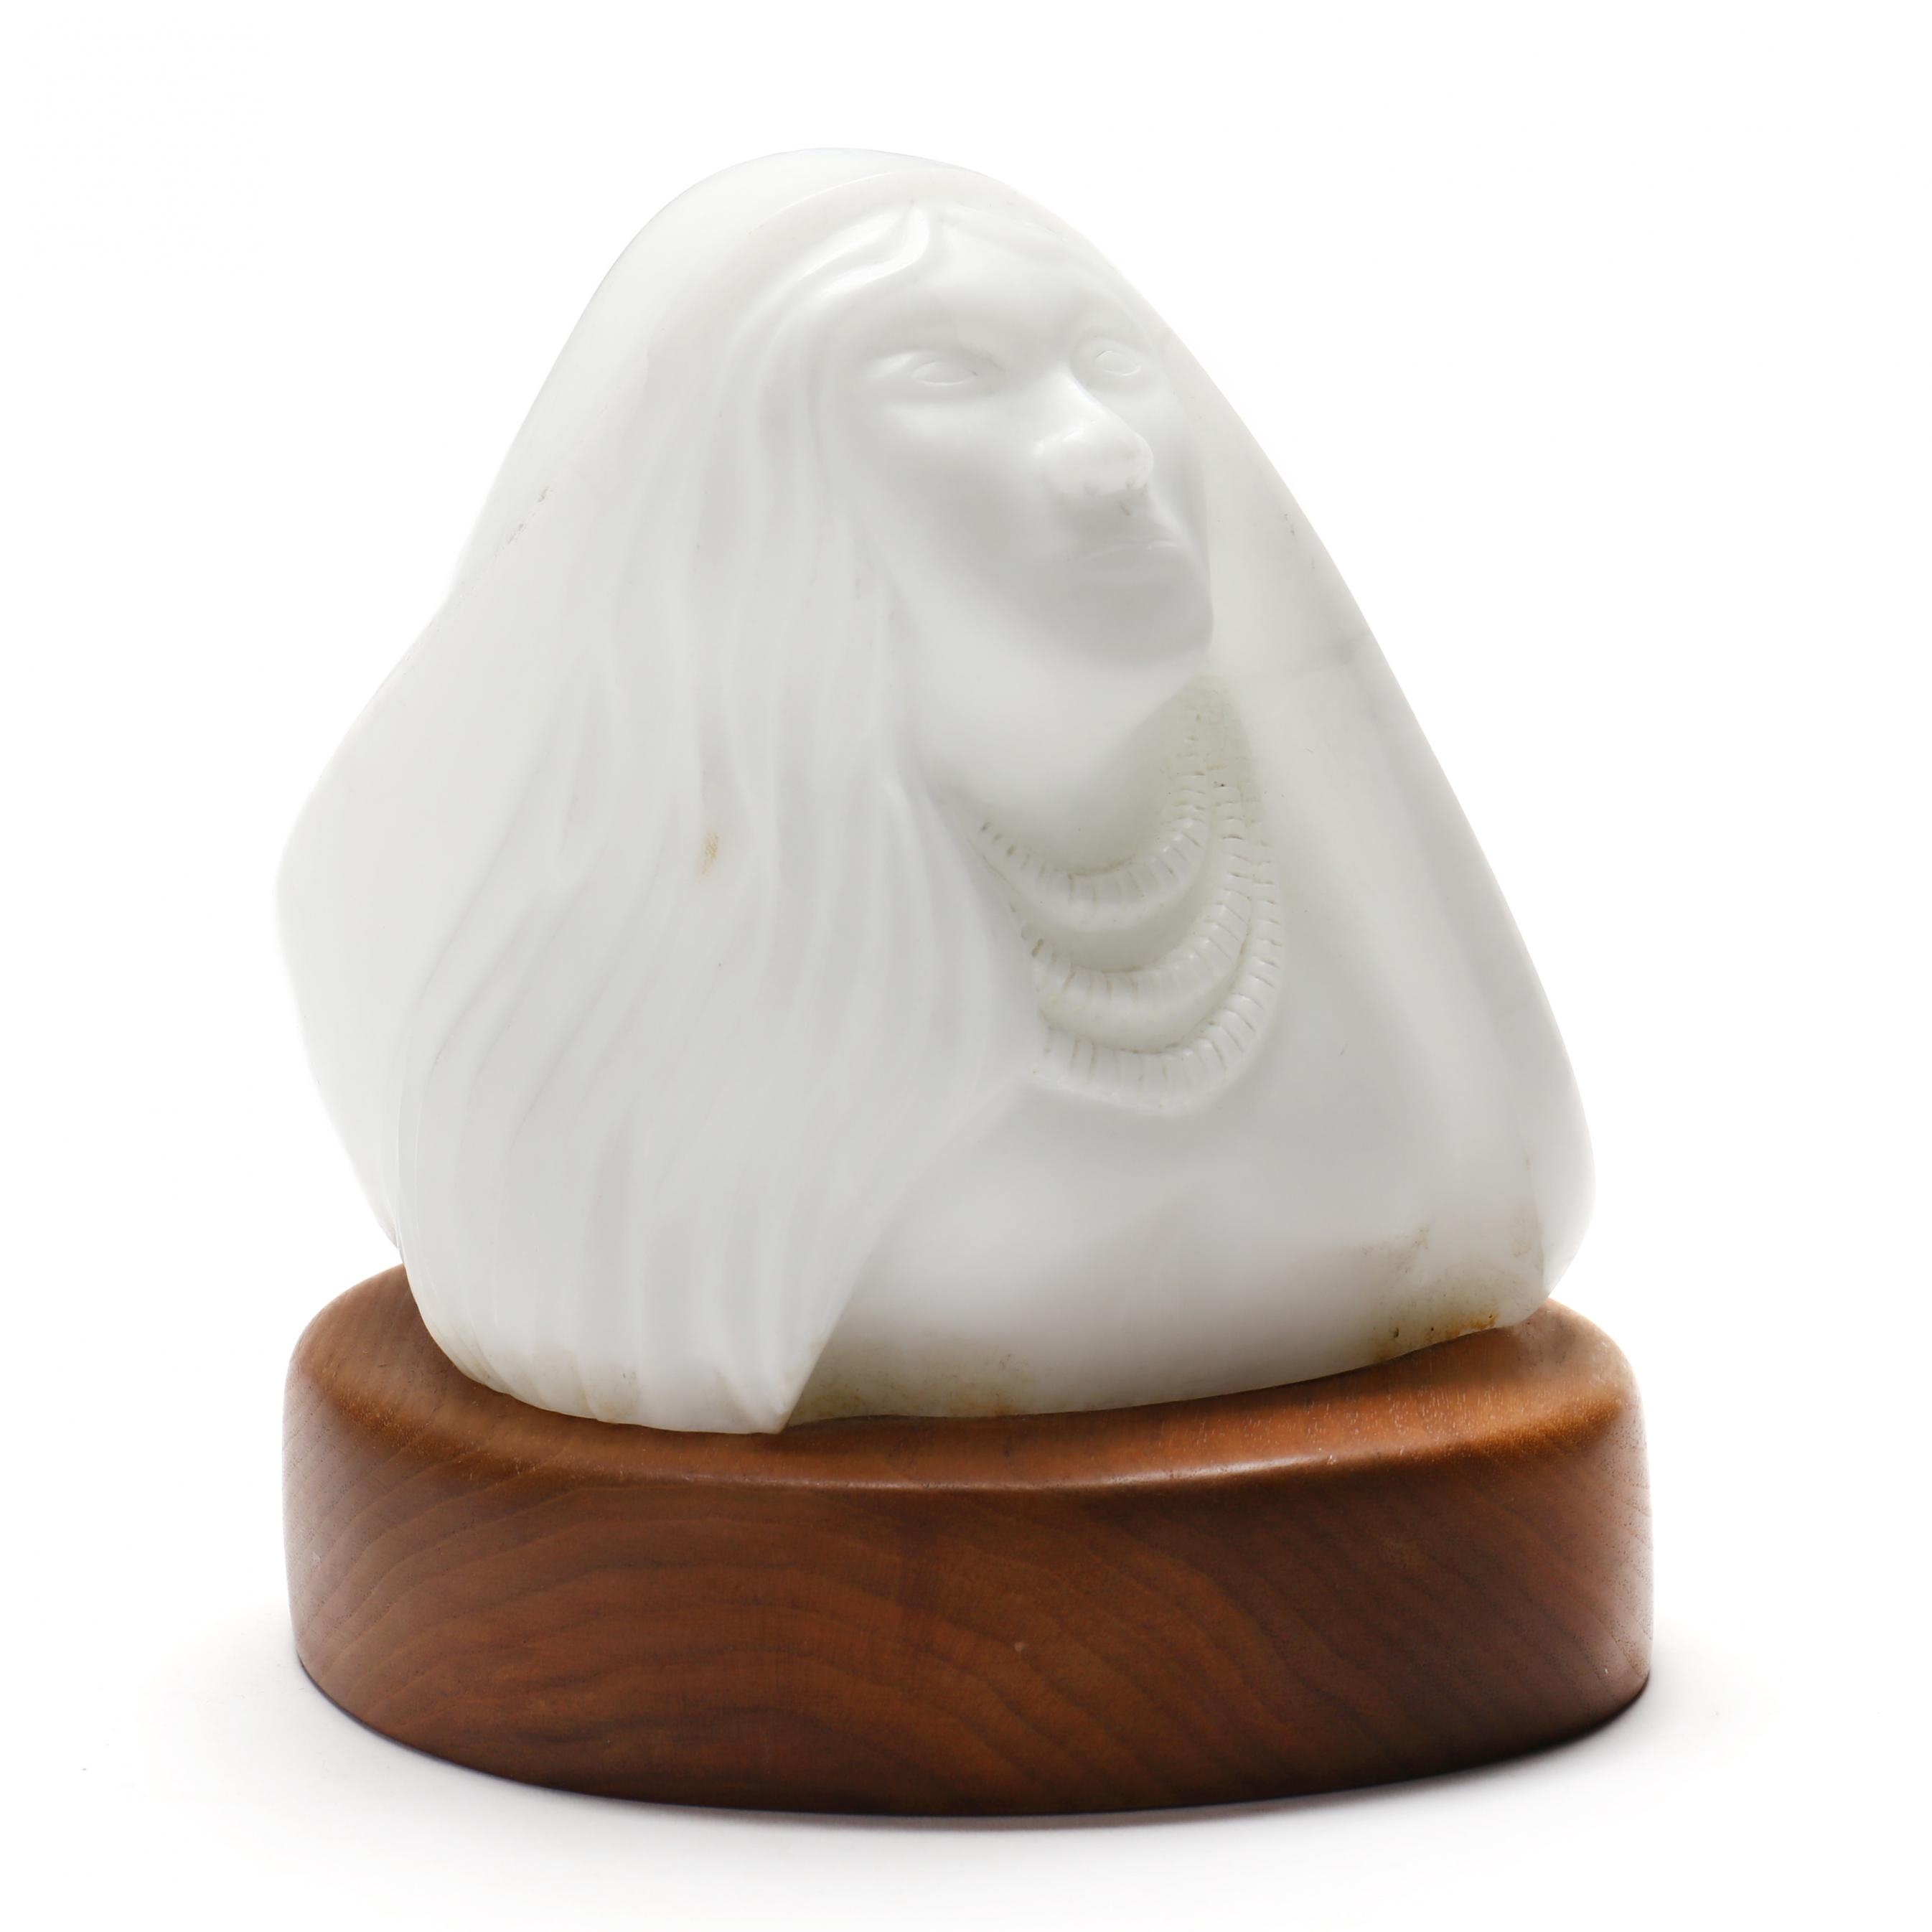 Artwork by Robert Dale Tsosie, Carved Stone Bust, Made of carved and polished white stone